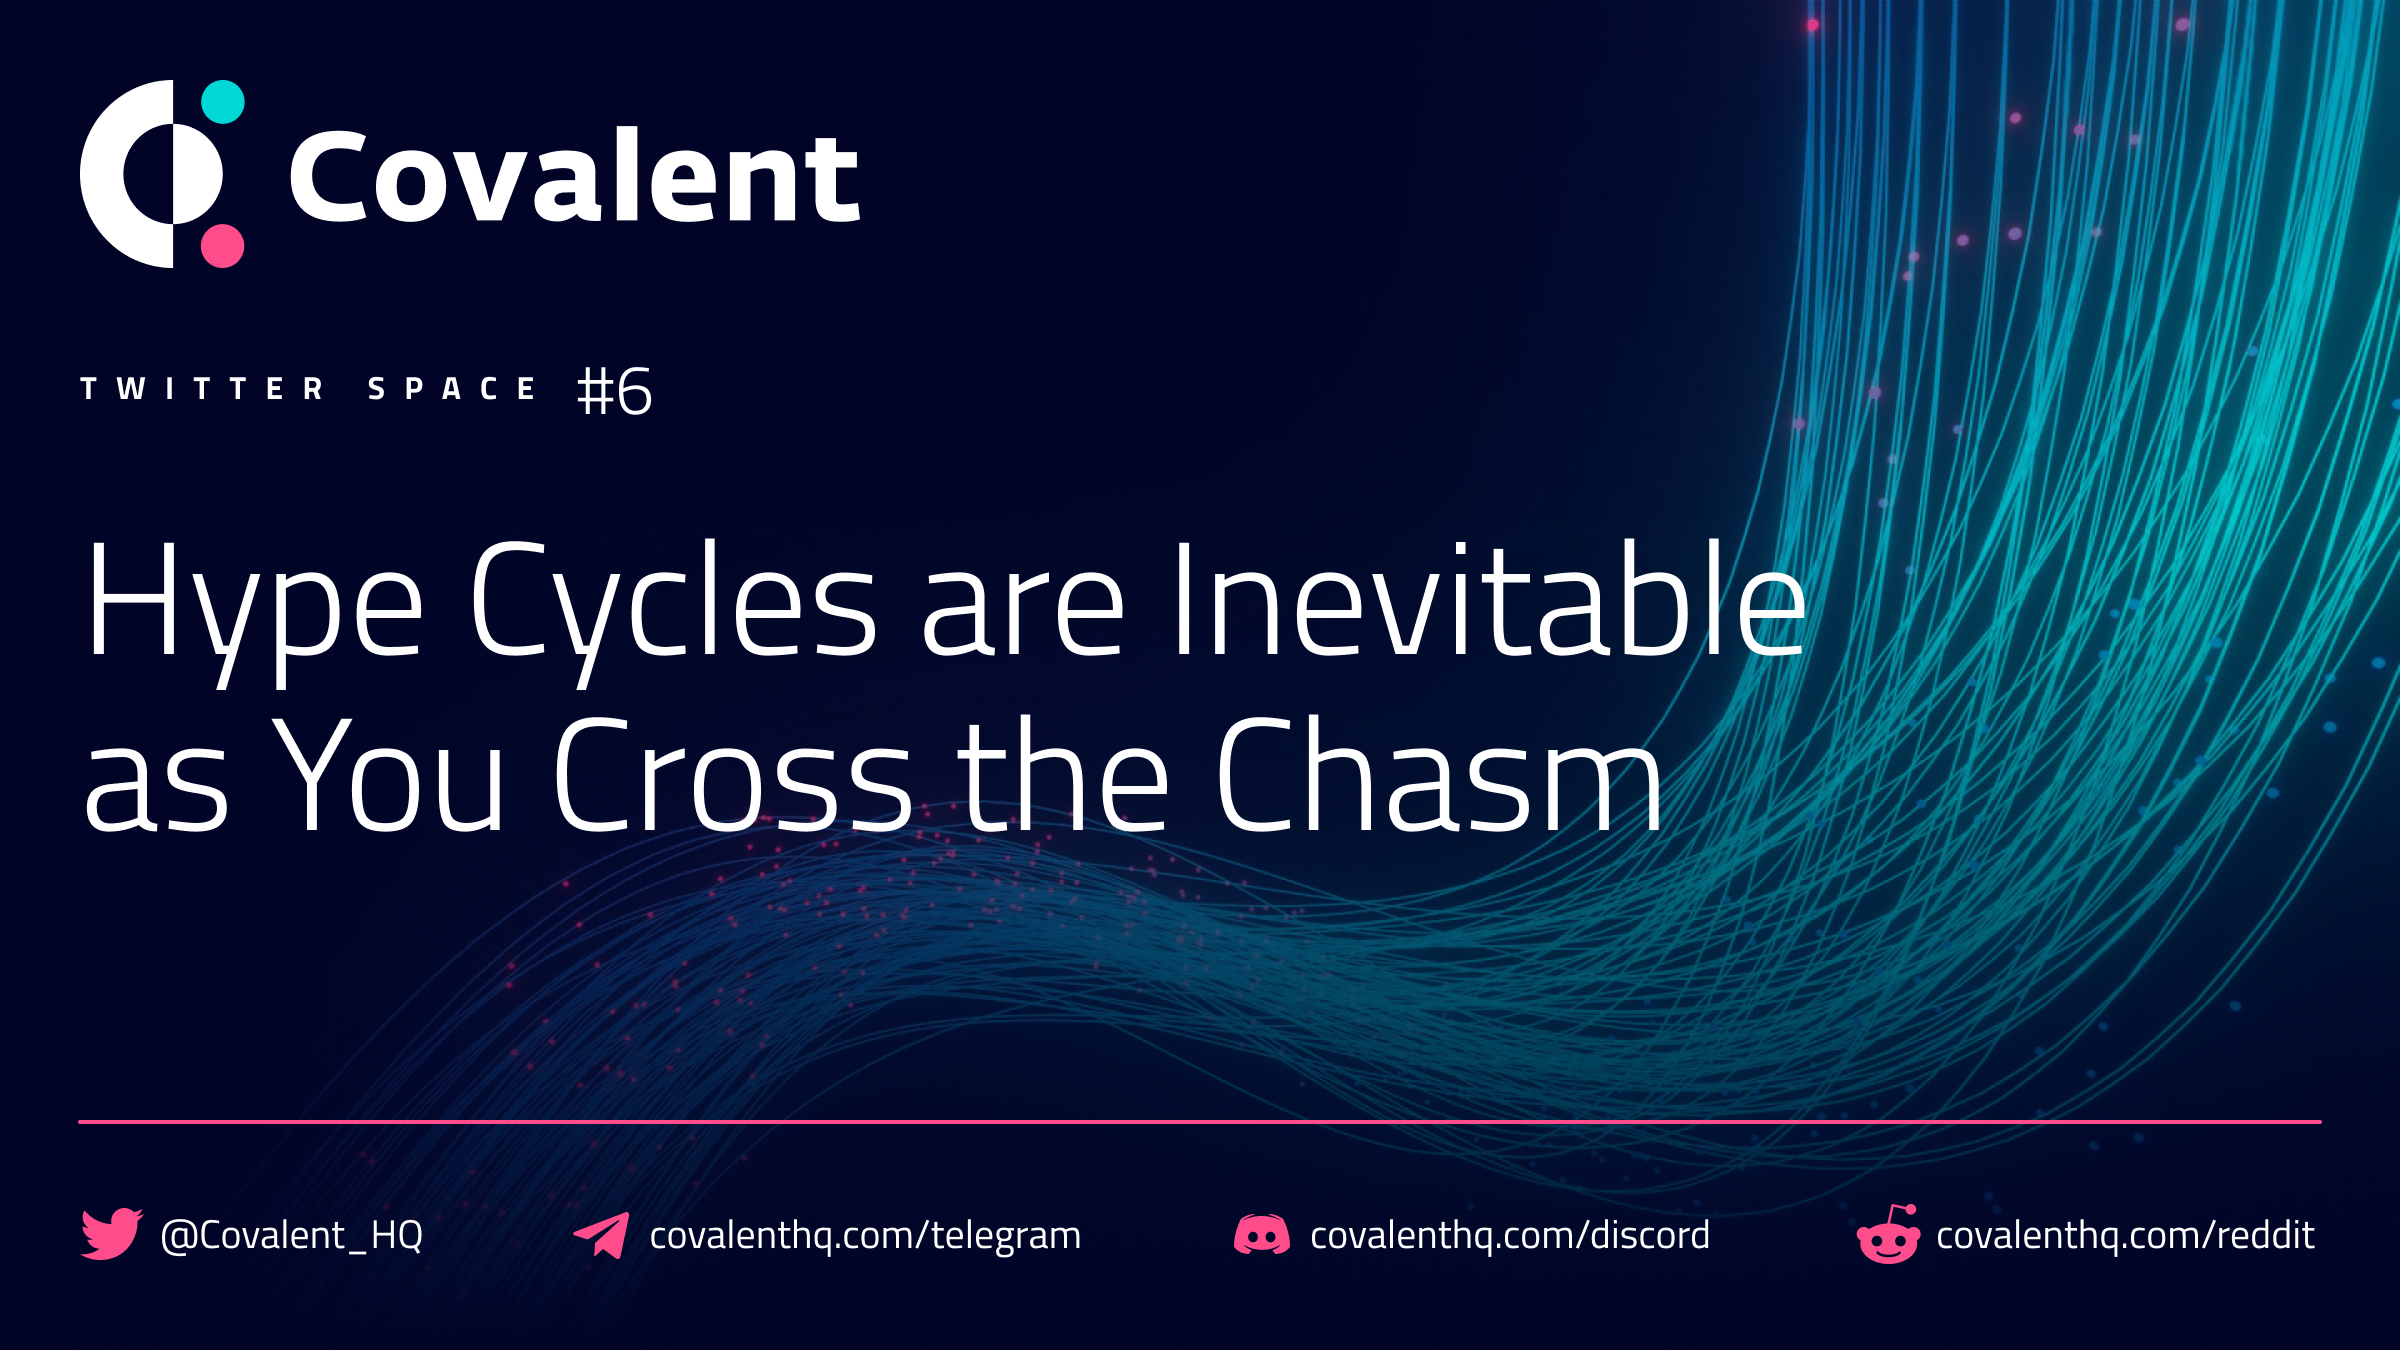 Hype Cycles are Inevitable as You Cross the Chasm